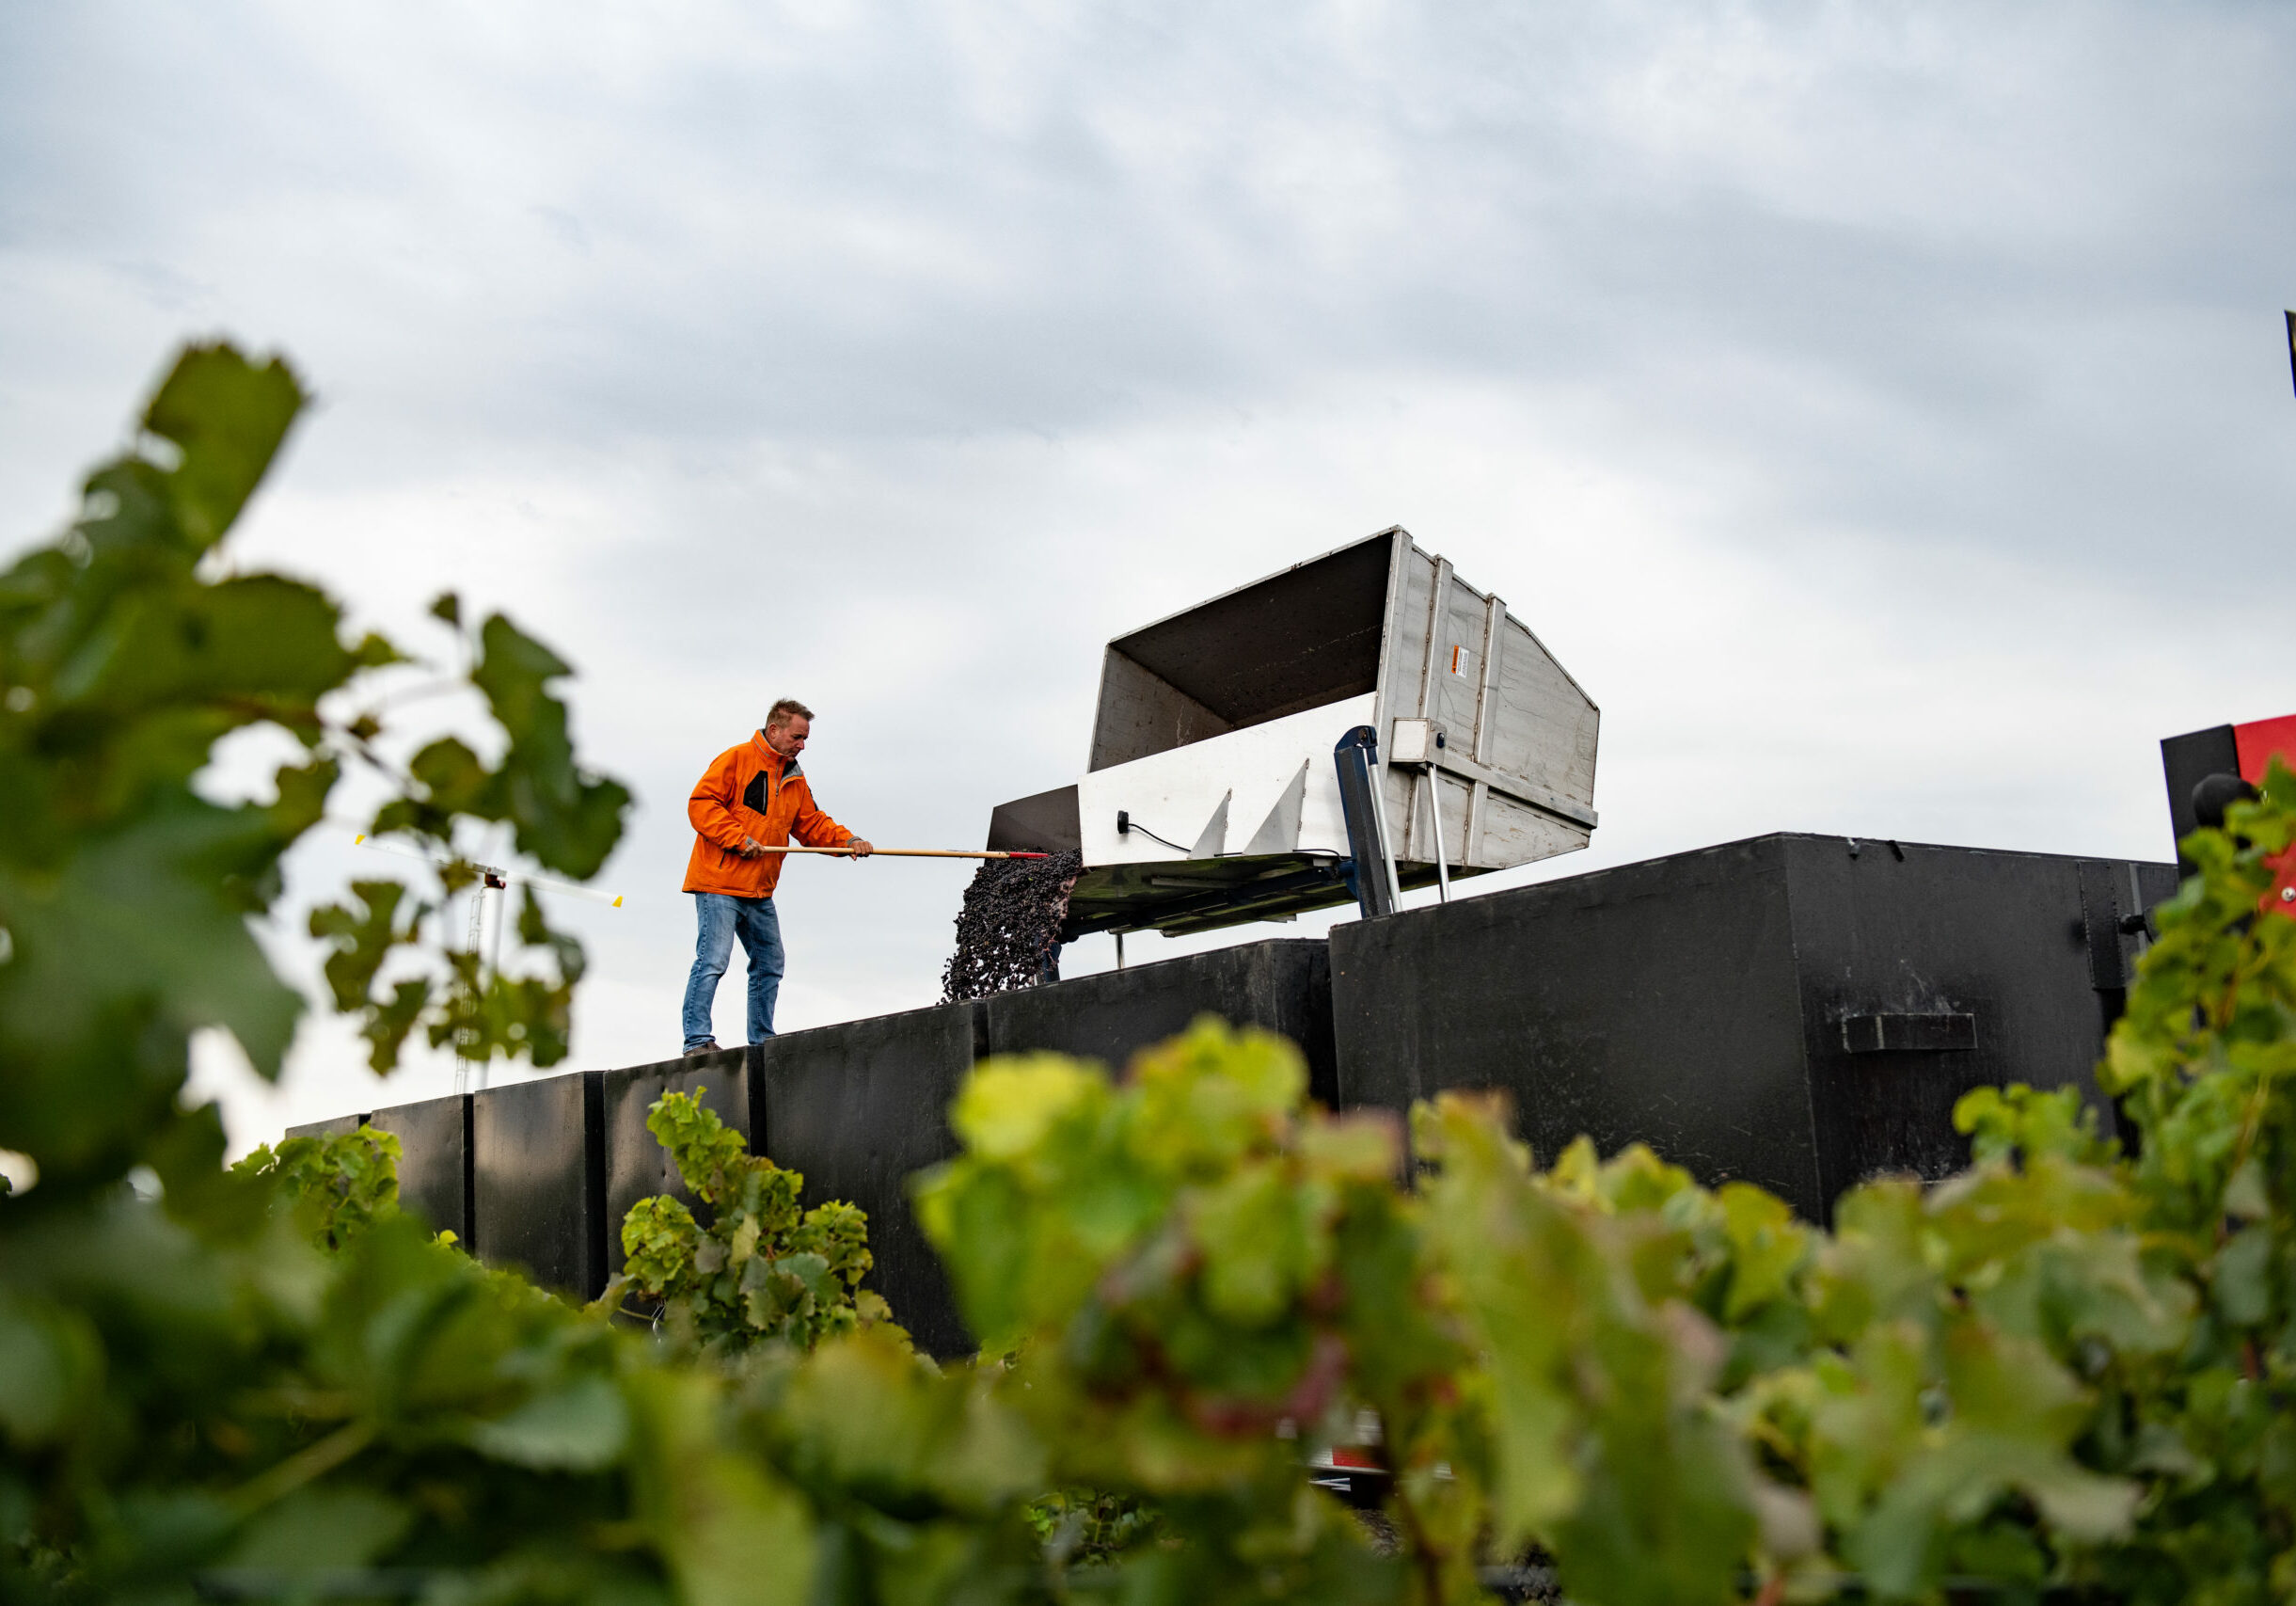 Grapes being unloaded from a truck